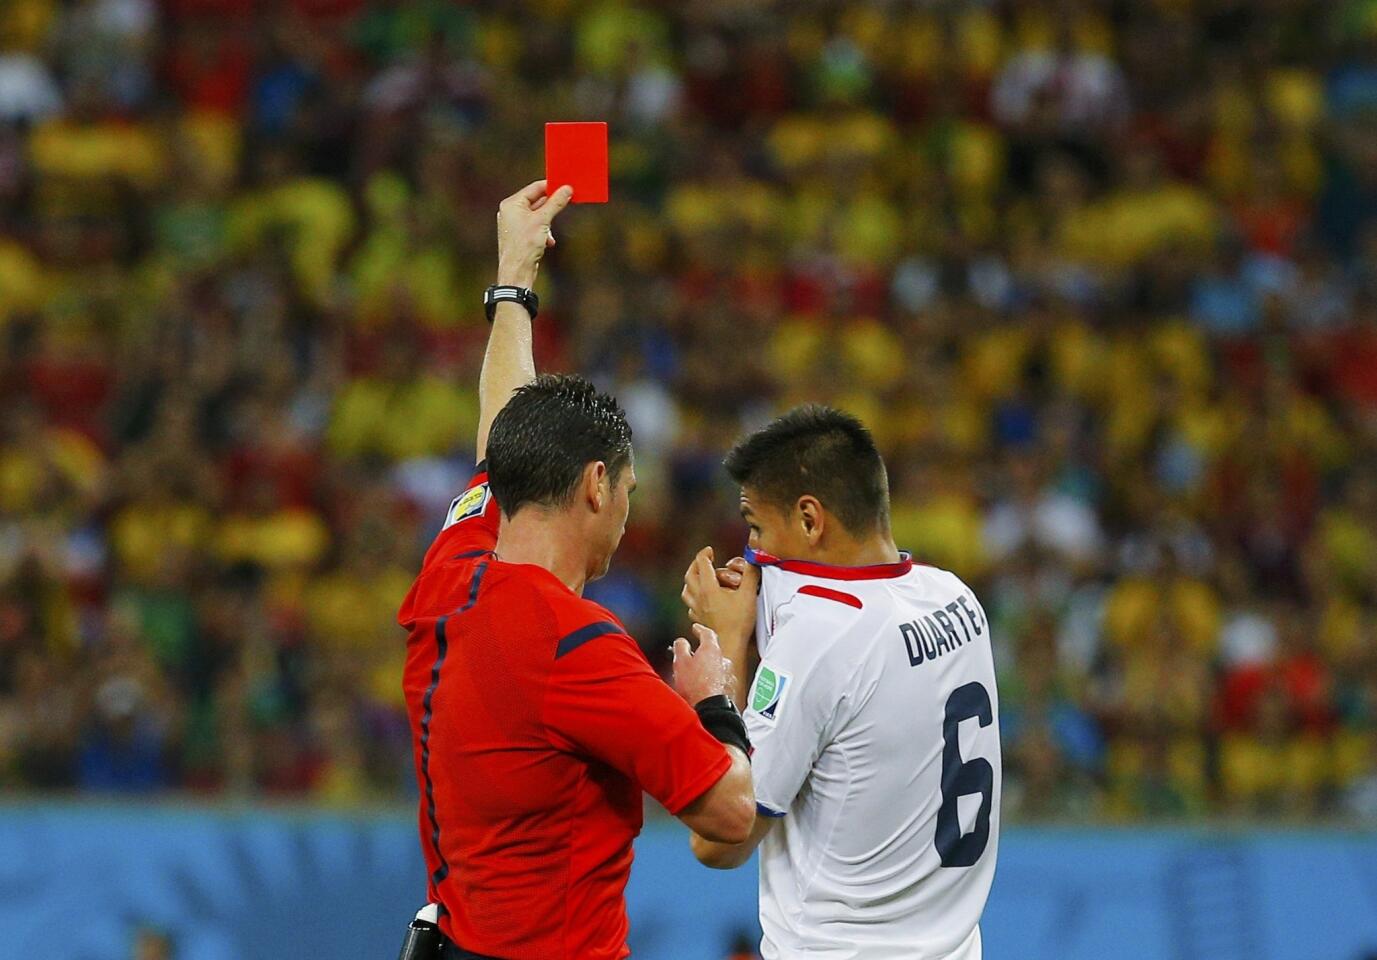 Costa Rica's Duarte is shown the red card by the referee during their 2014 World Cup round of 16 game against Greece at the Pernambuco arena in Recife